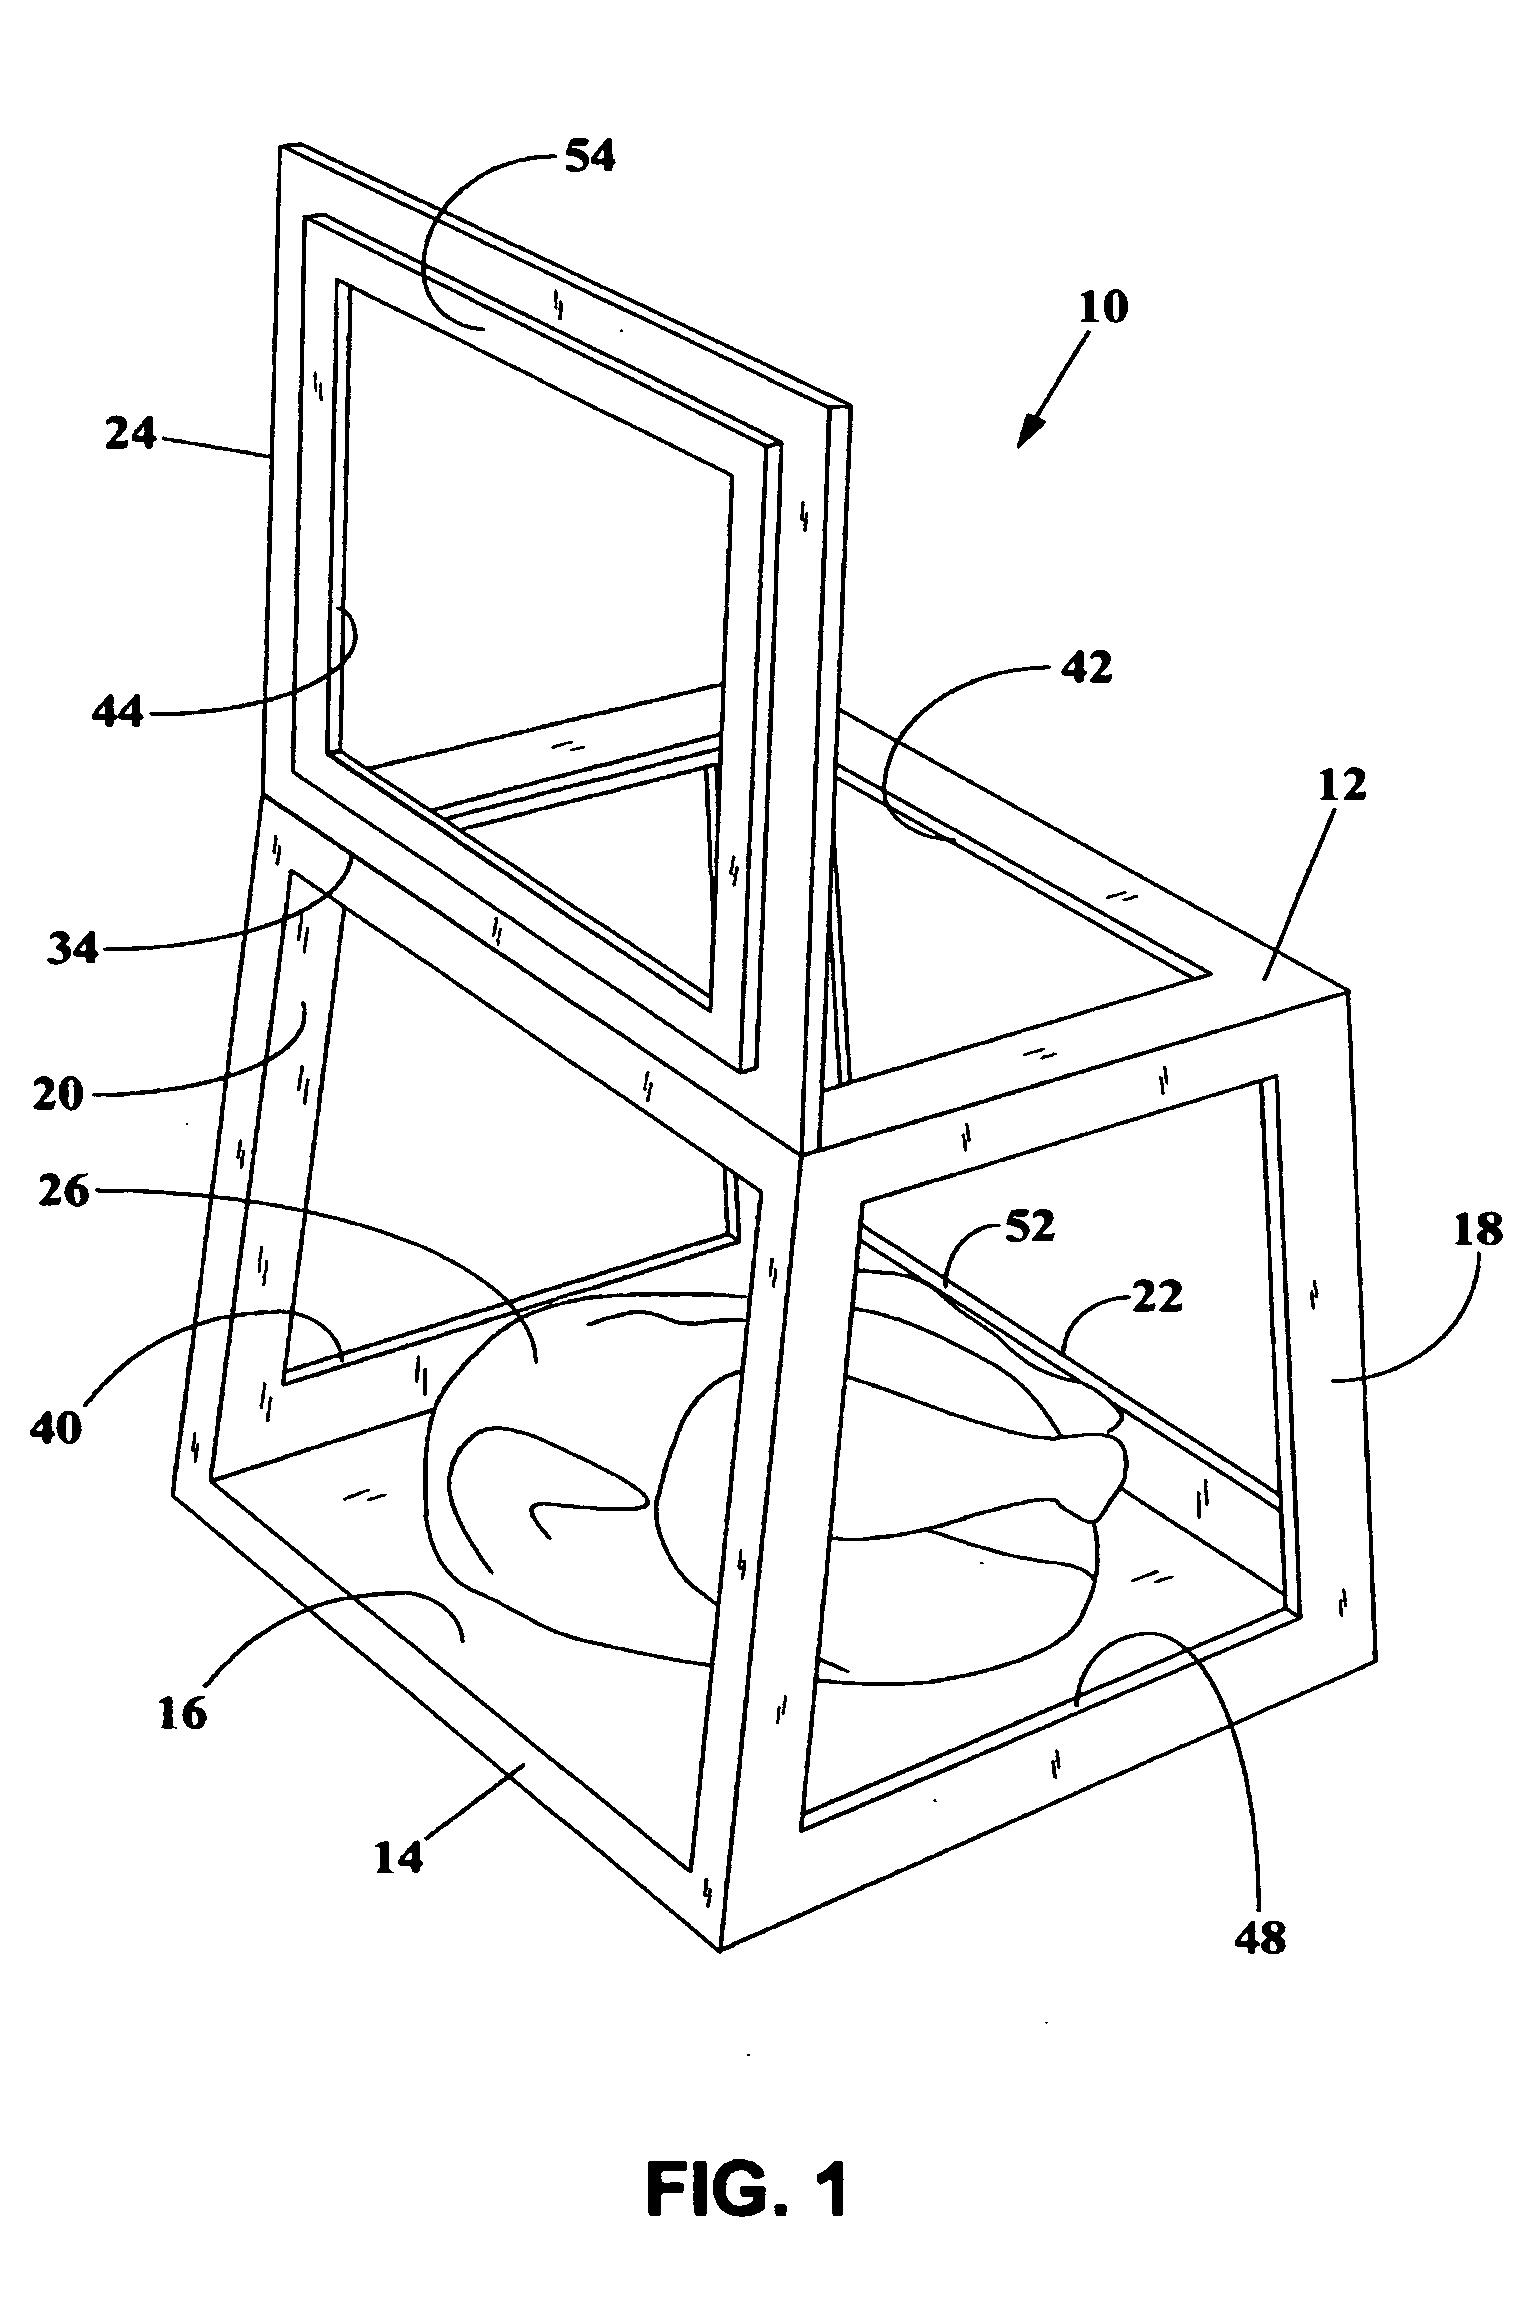 Food-protective apparatus for use in cooking and food-serving environments